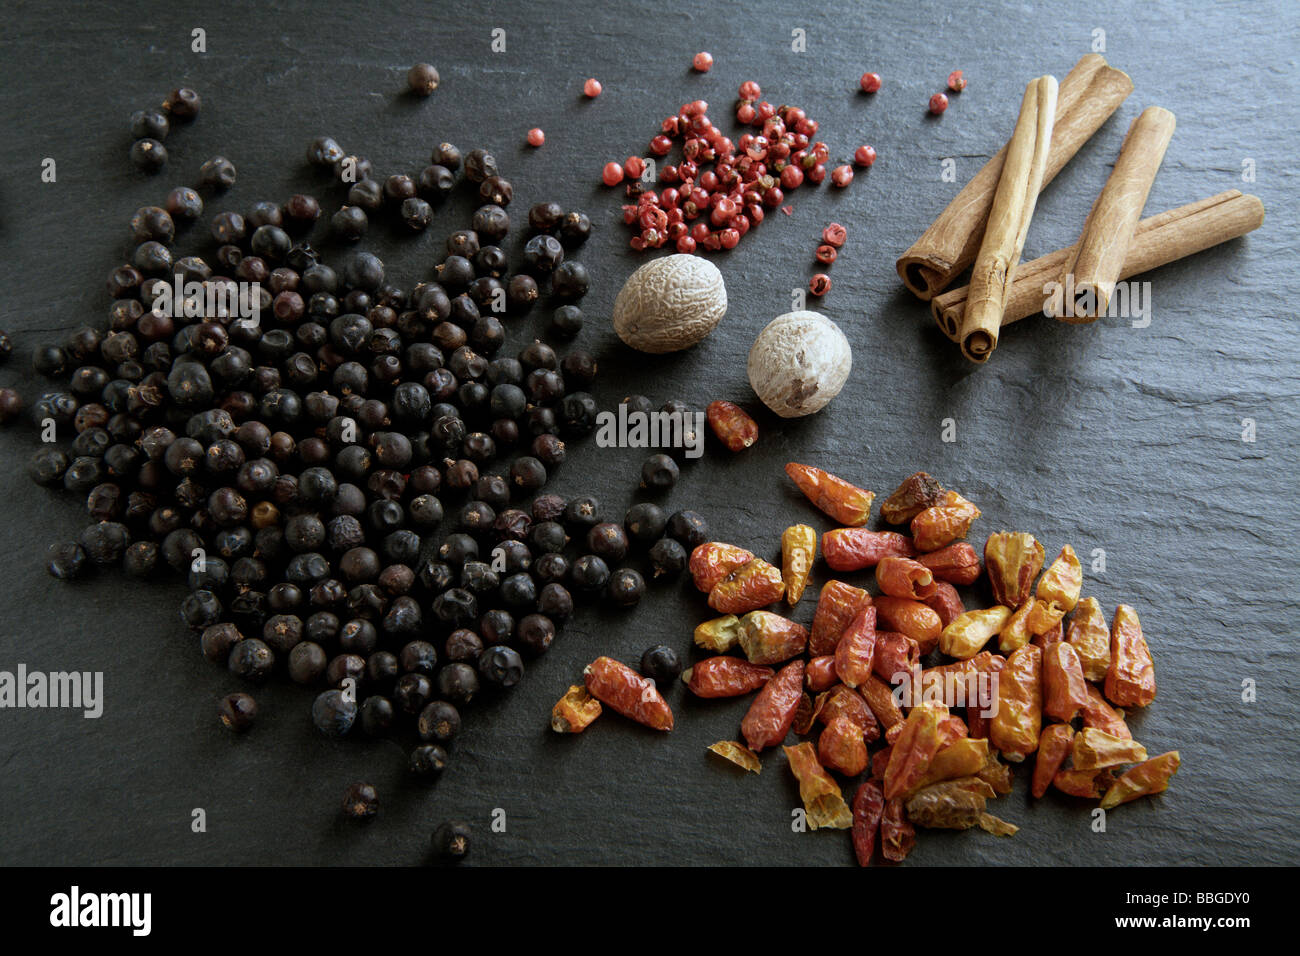 Different spices on a slate, juniper, chili peppers, red pepper, nutmeg, cinnamon sticks Stock Photo